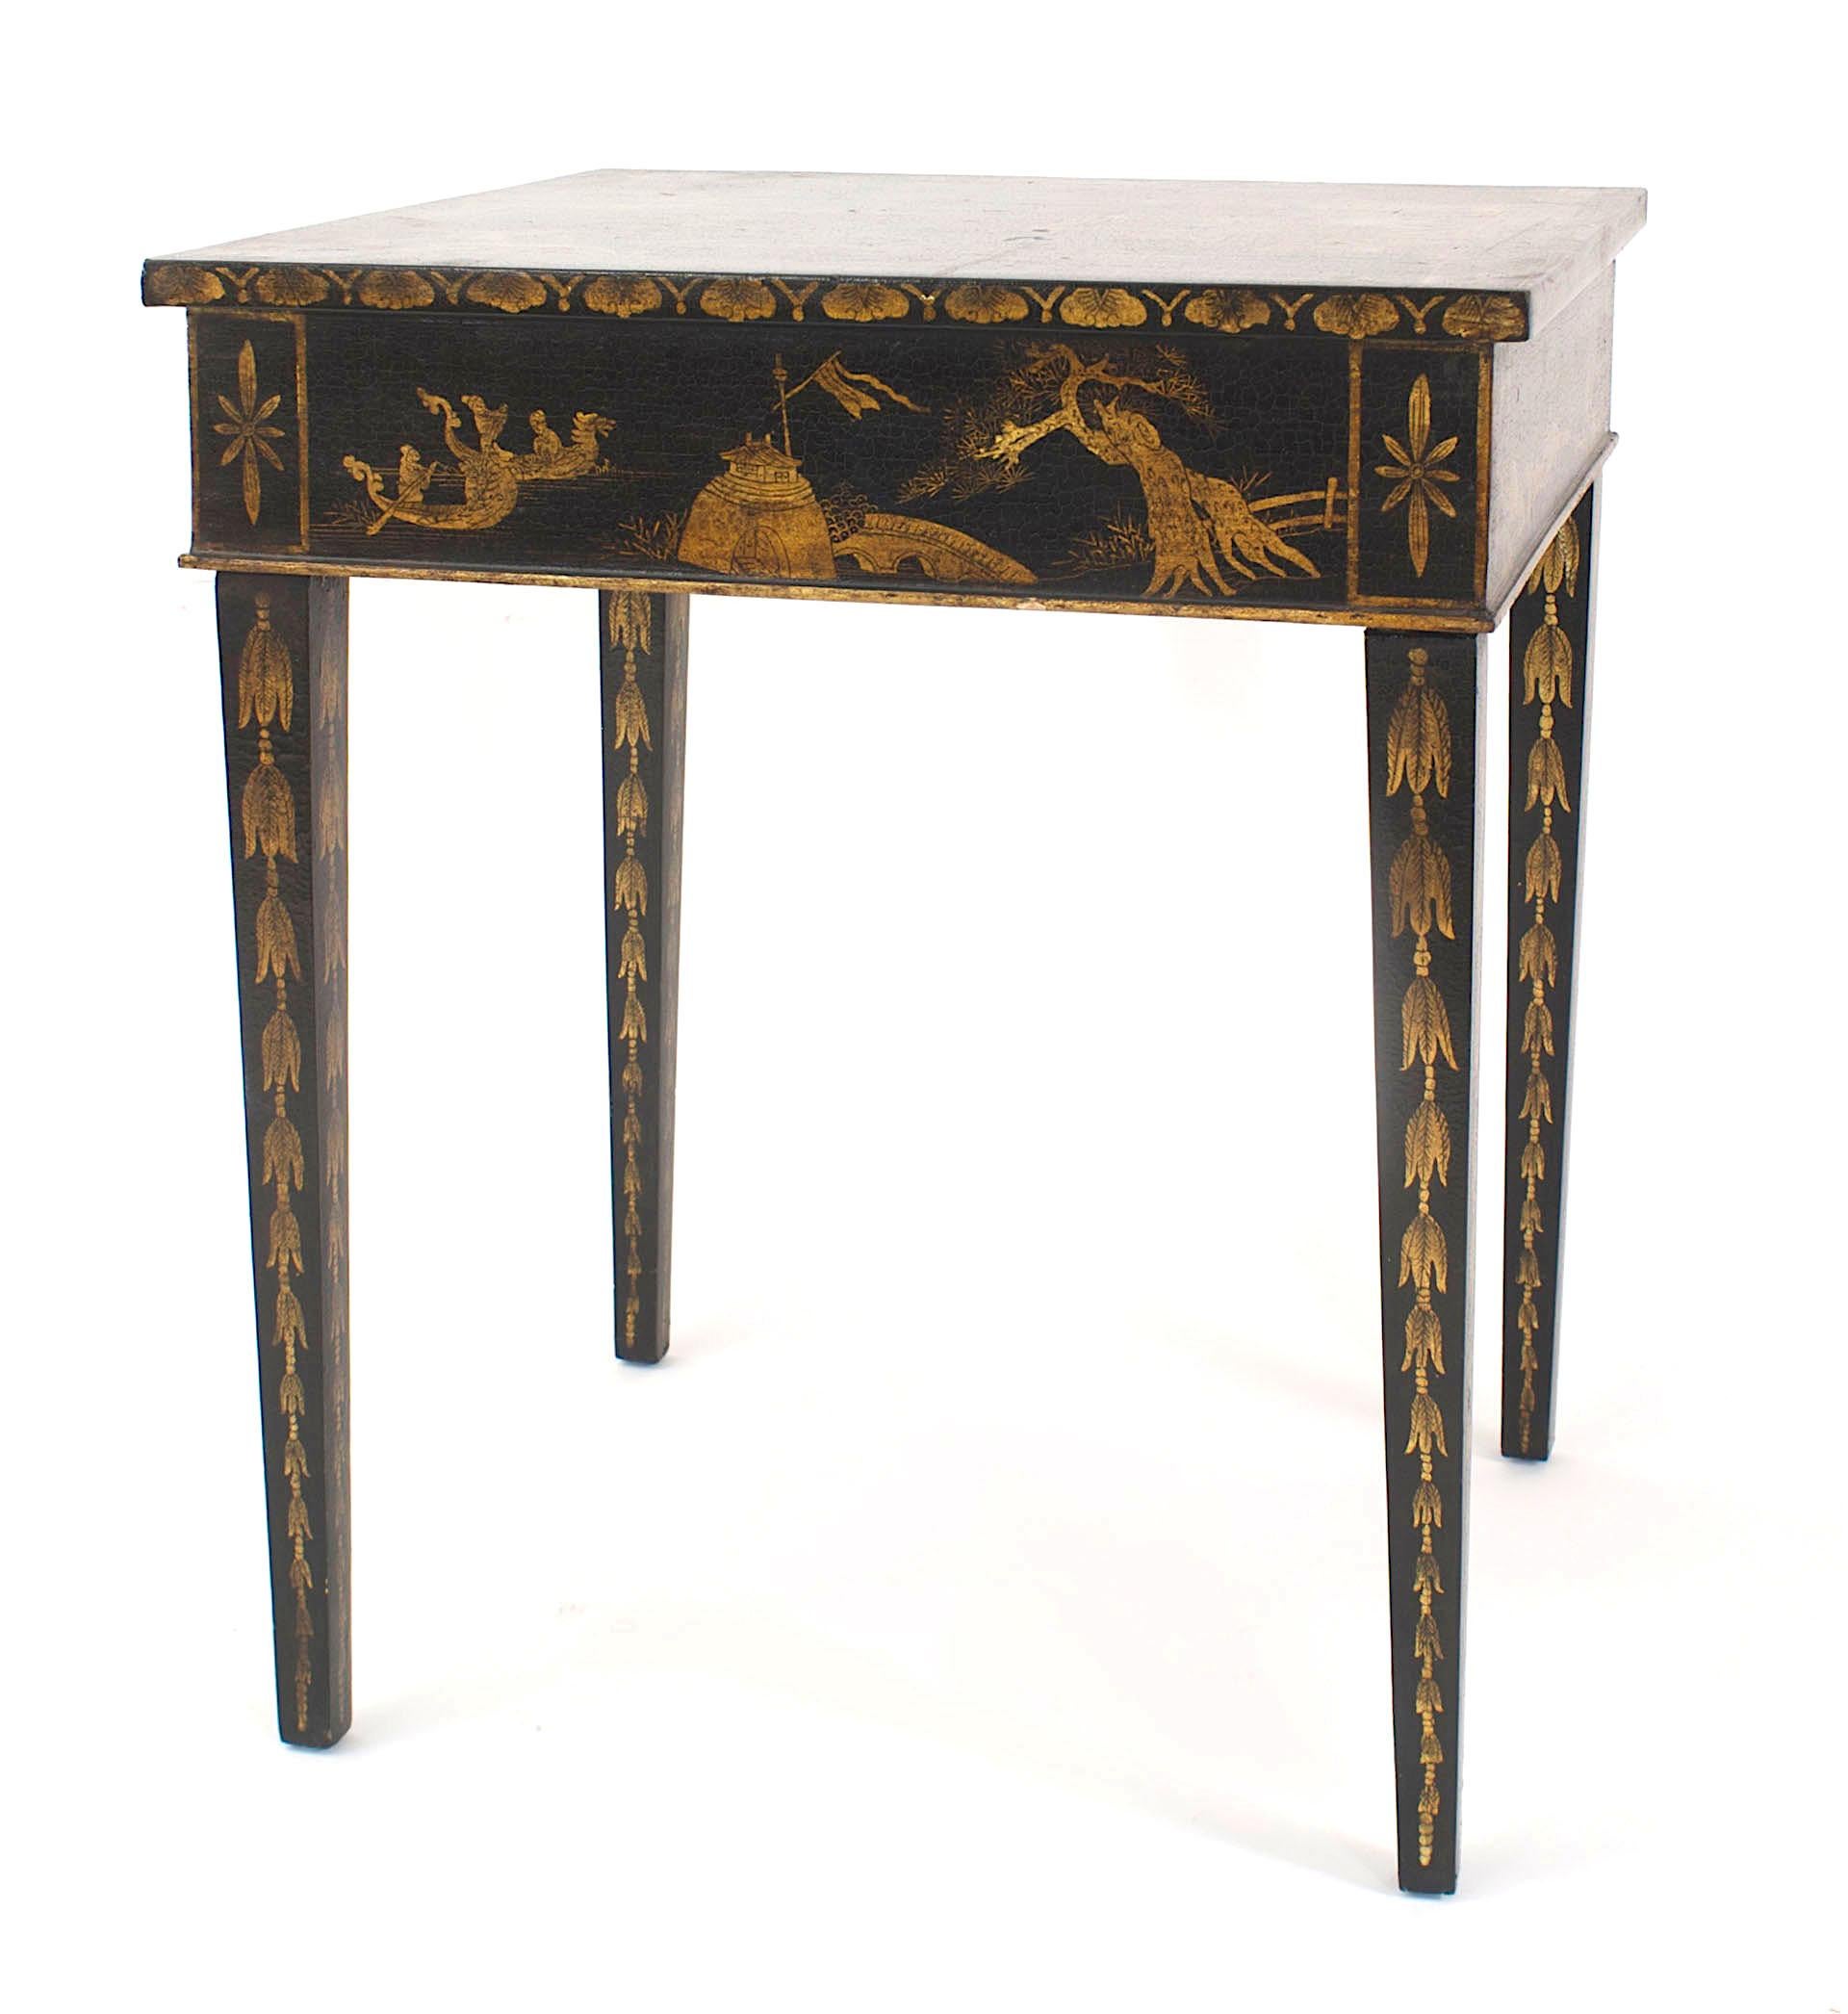 Pair of English Regency style black lacquered chinoiserie decorated square end tables (Priced as Pair). 